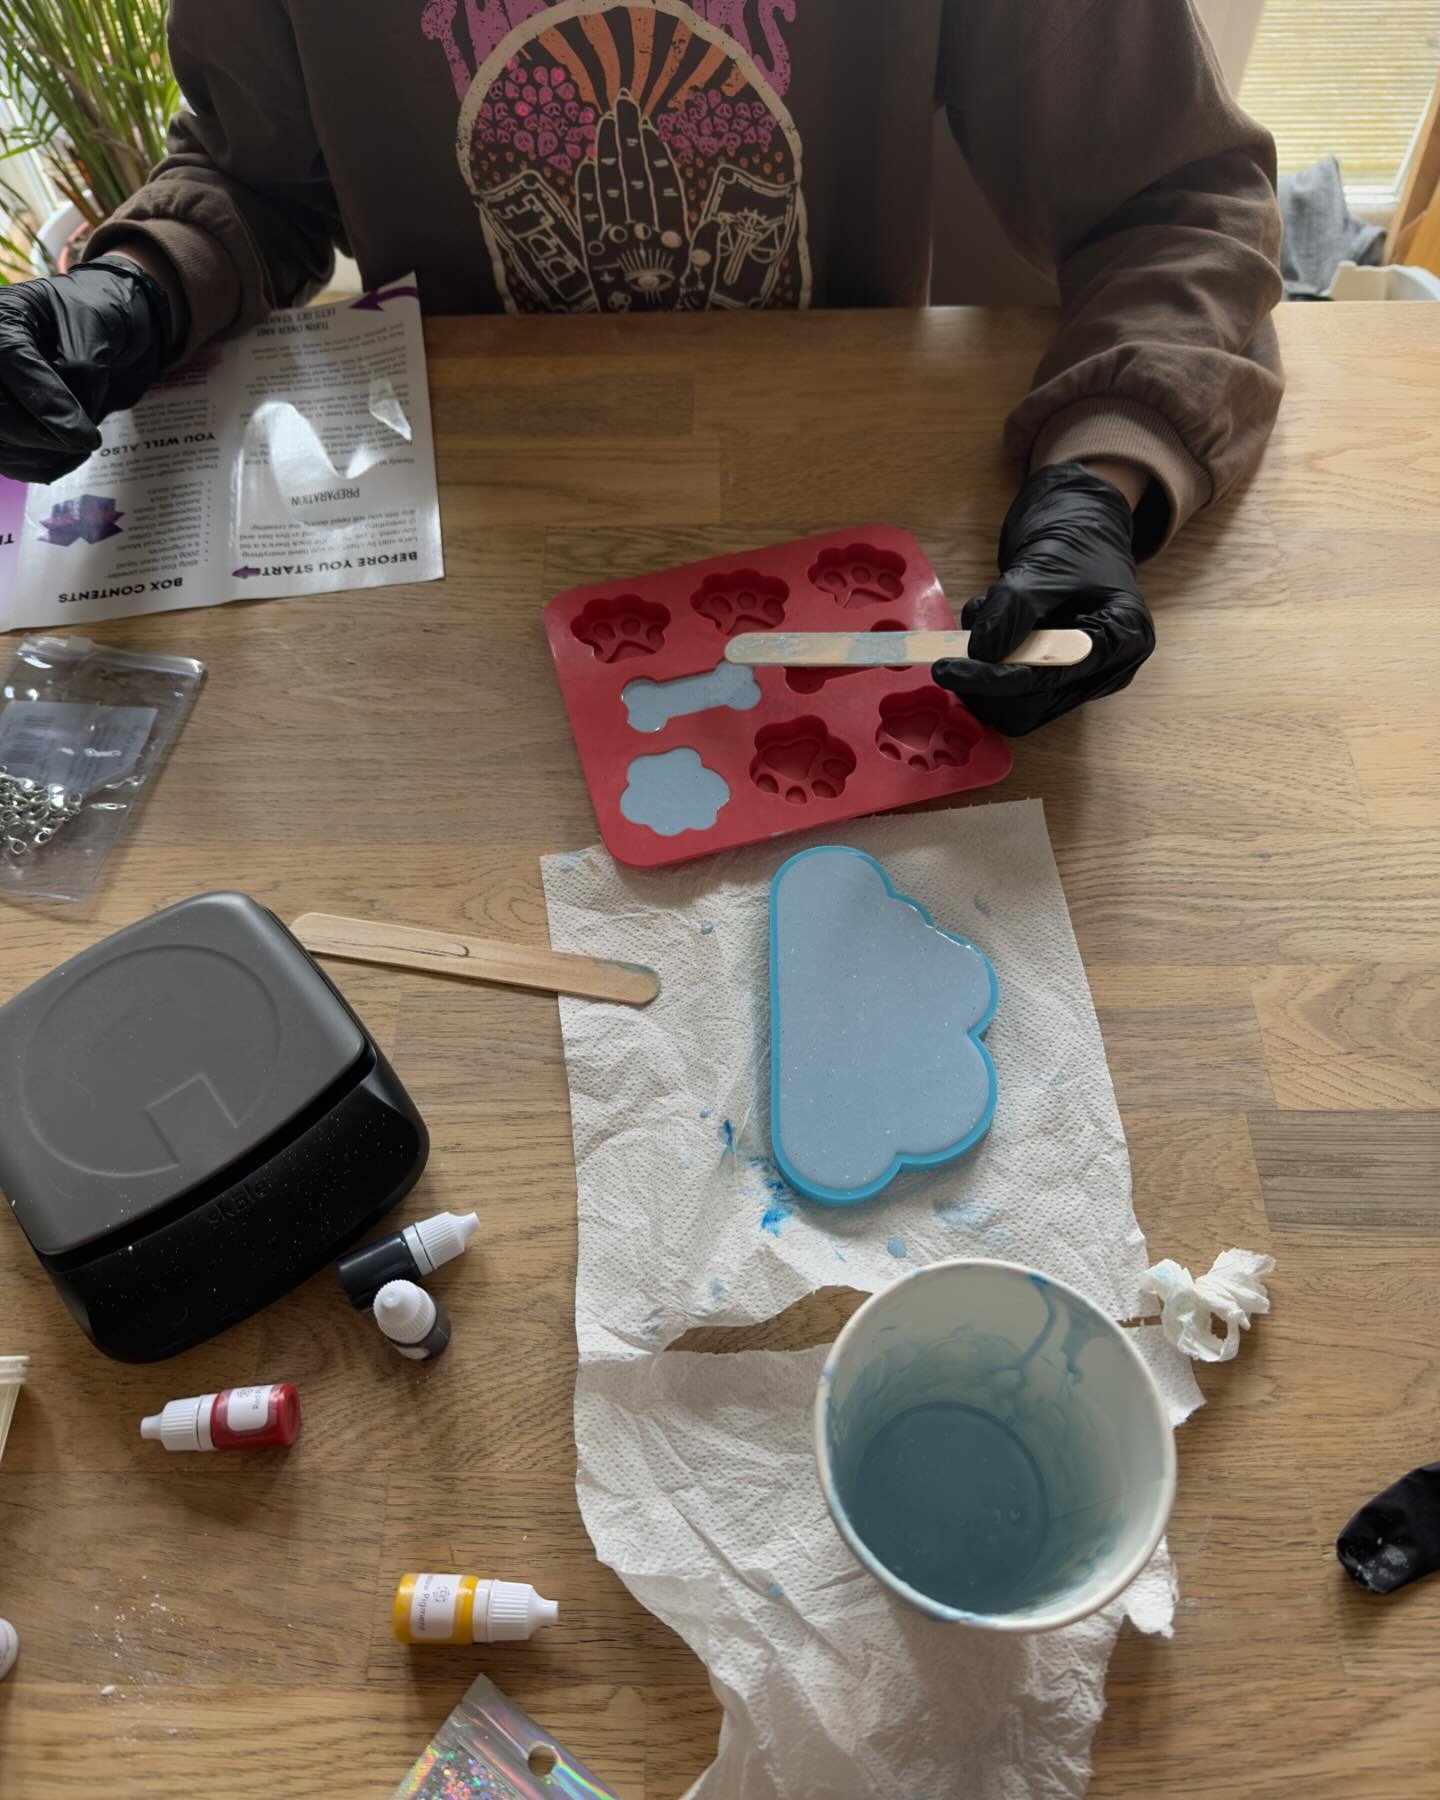 Summer and I have been crafting today, making resin trinket trays #crankycowcreations @crankycowcreations #mumanddaughtertime #crafts #resincraft